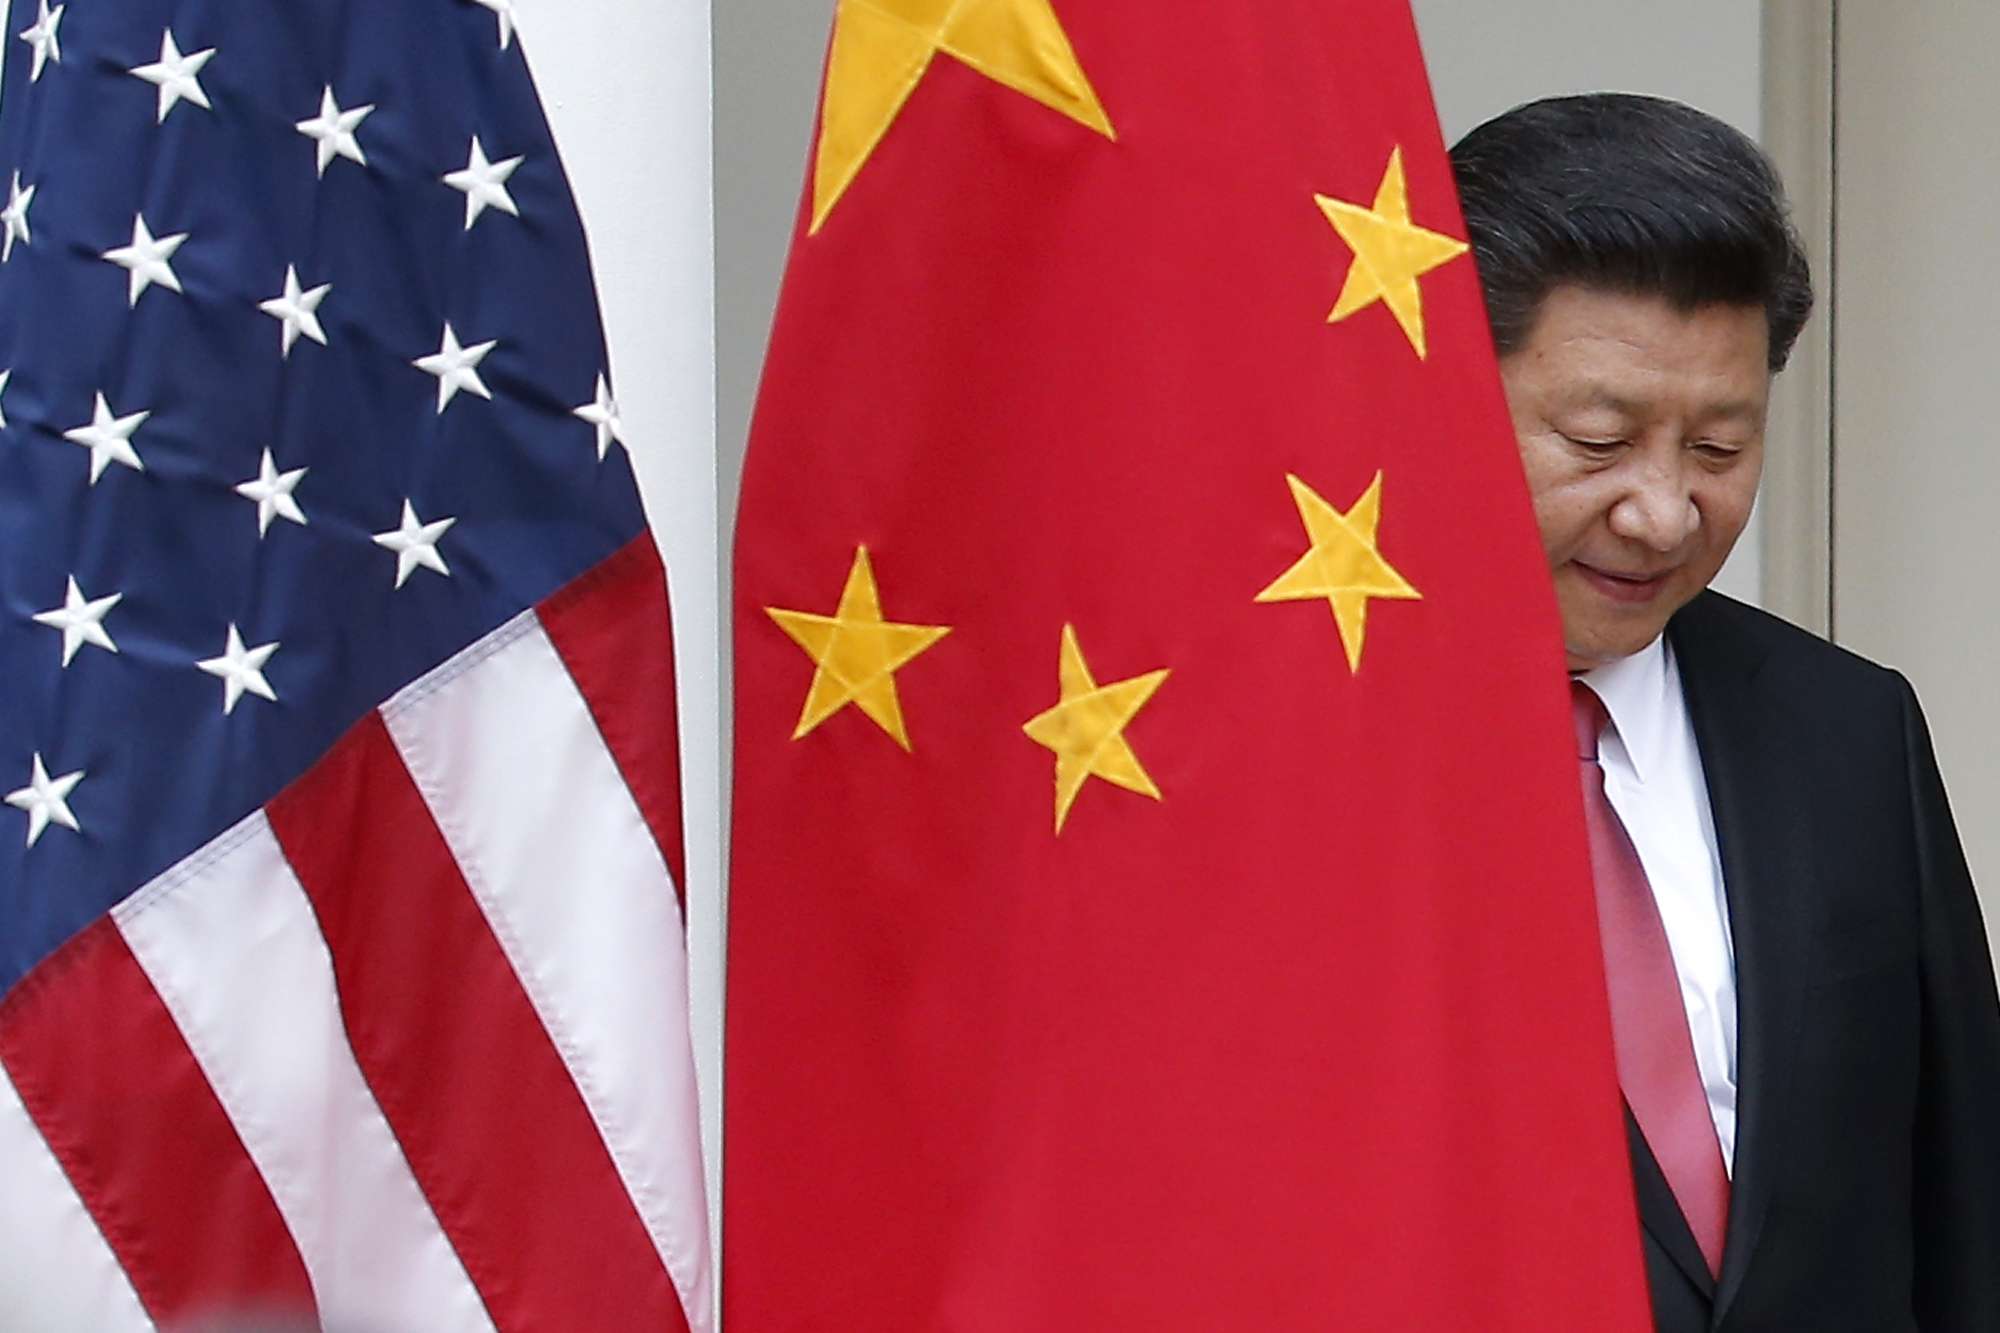 Florida visit gives Xi another opportunity to promote ‘new type of great power relations’